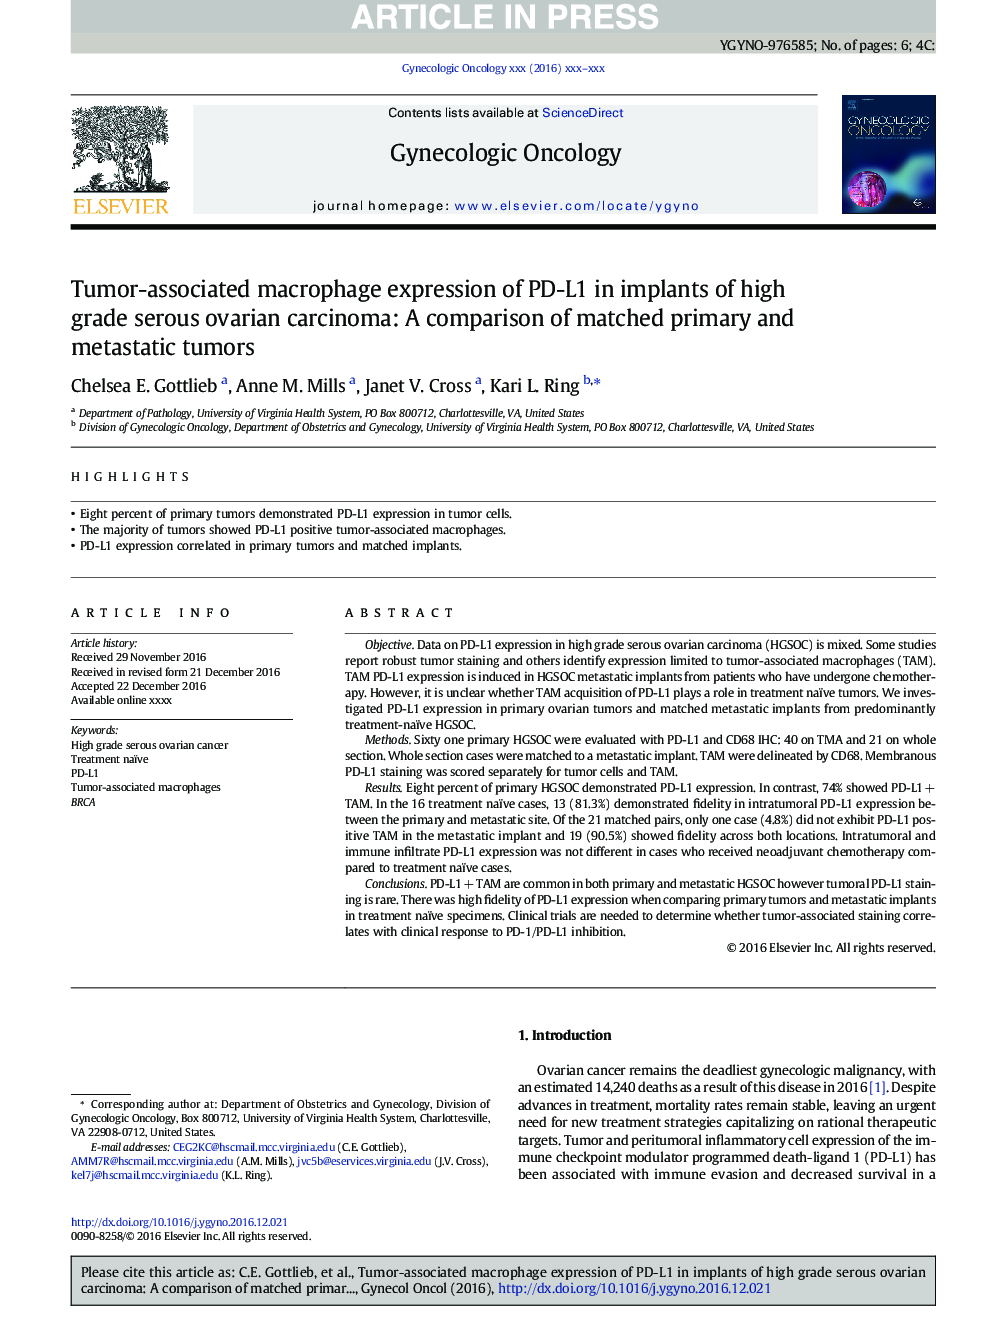 Tumor-associated macrophage expression of PD-L1 in implants of high grade serous ovarian carcinoma: A comparison of matched primary and metastatic tumors